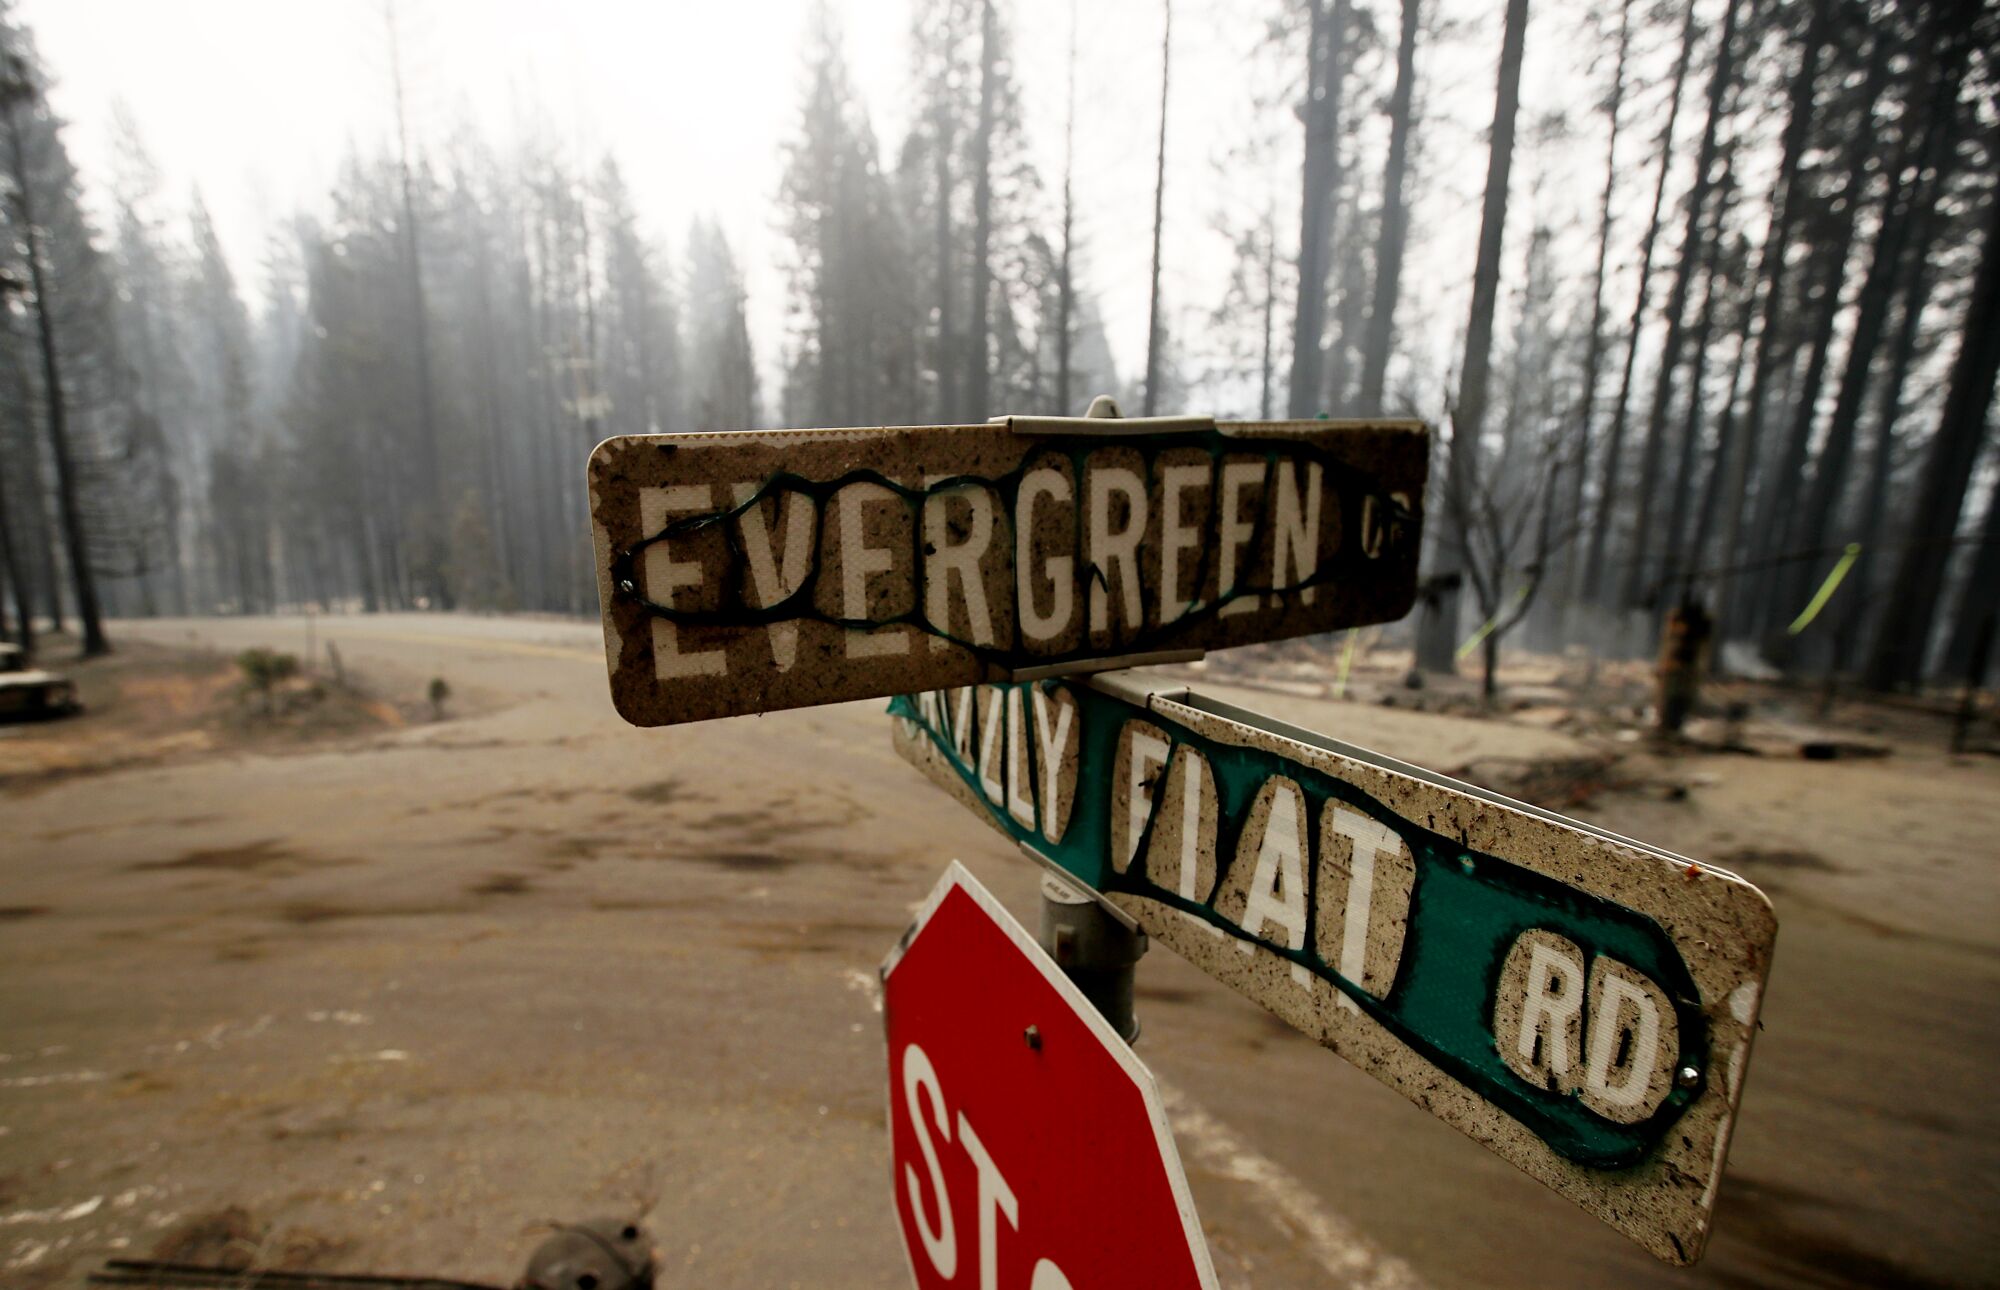 A burned stop sign at Evergreen and Grizzly Flat roads.